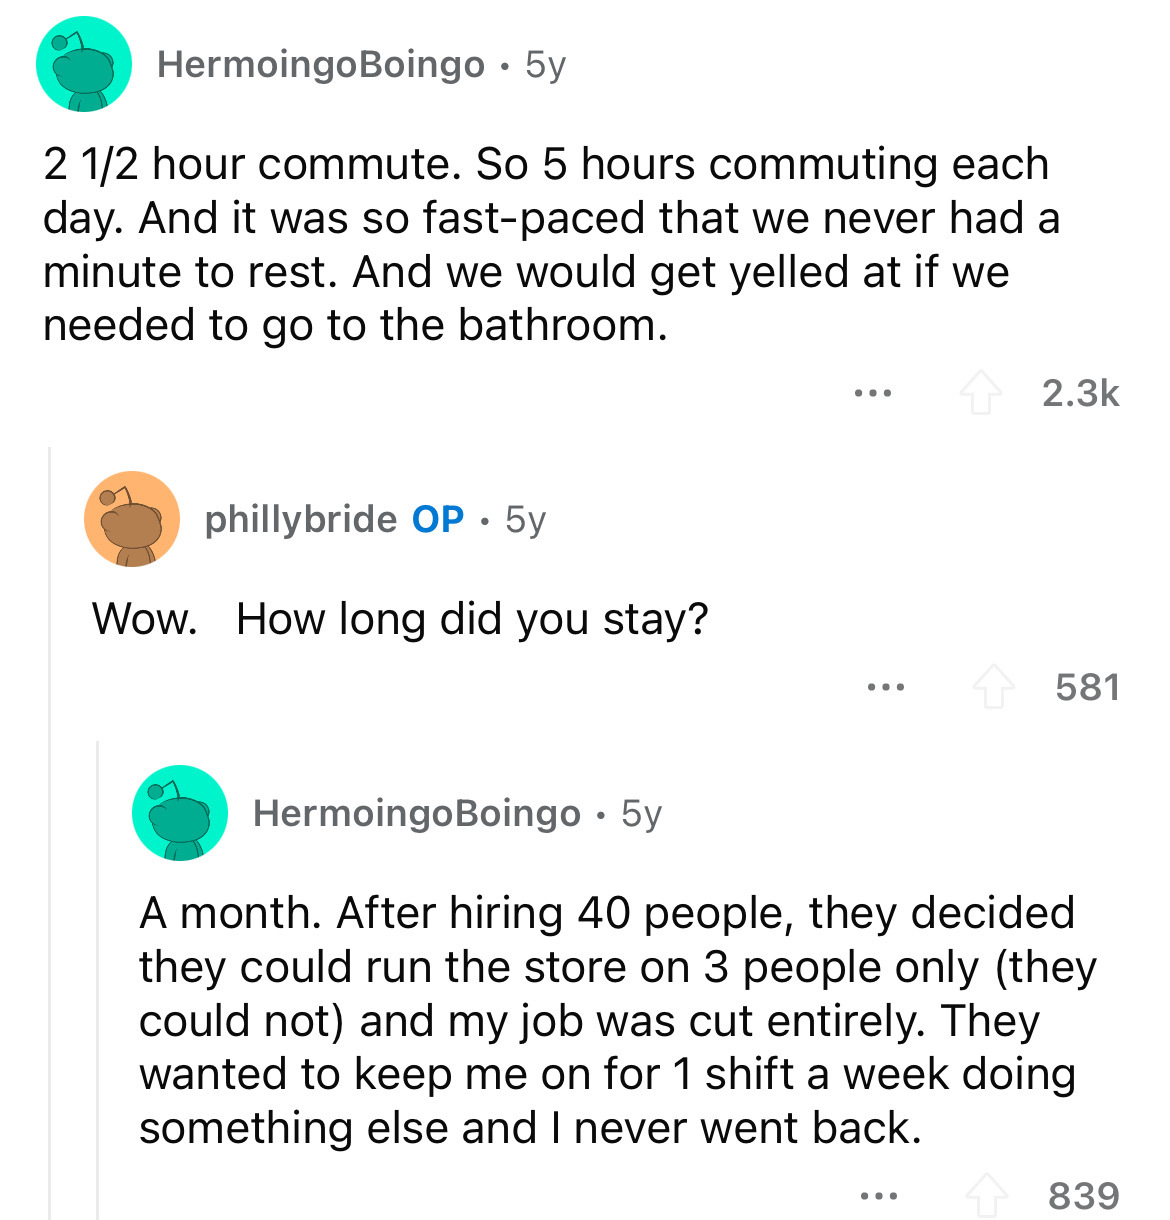 screenshot - Hermoingo Boingo 5y 2 12 hour commute. So 5 hours commuting each day. And it was so fastpaced that we never had a minute to rest. And we would get yelled at if we needed to go to the bathroom. phillybride Op. 5y Wow. How long did you stay? ..